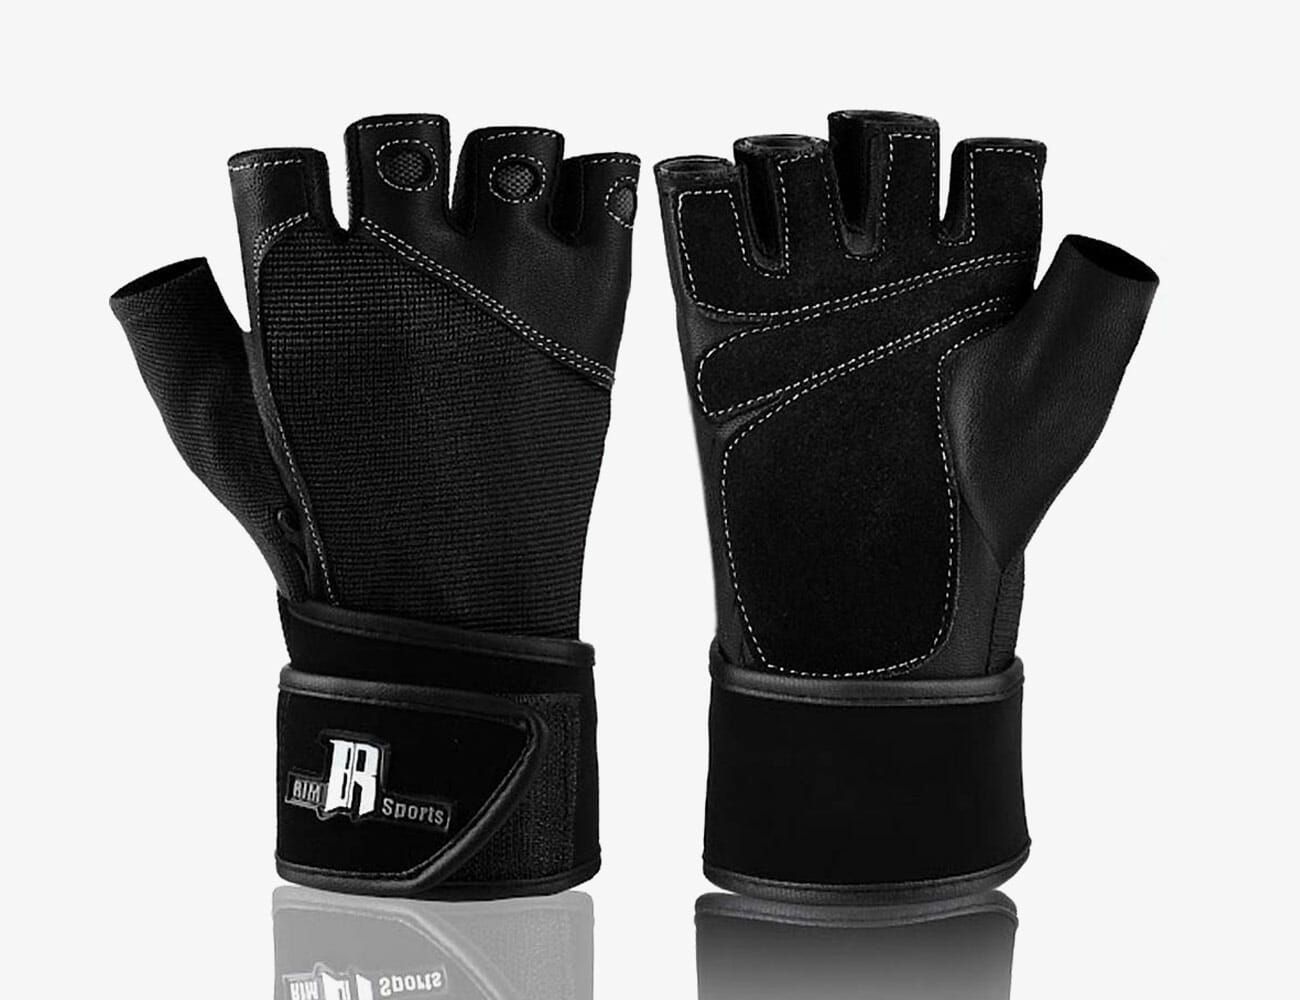 BWicked Weight lifting Body Building Wrist Support Gym Gloves Grip Training 